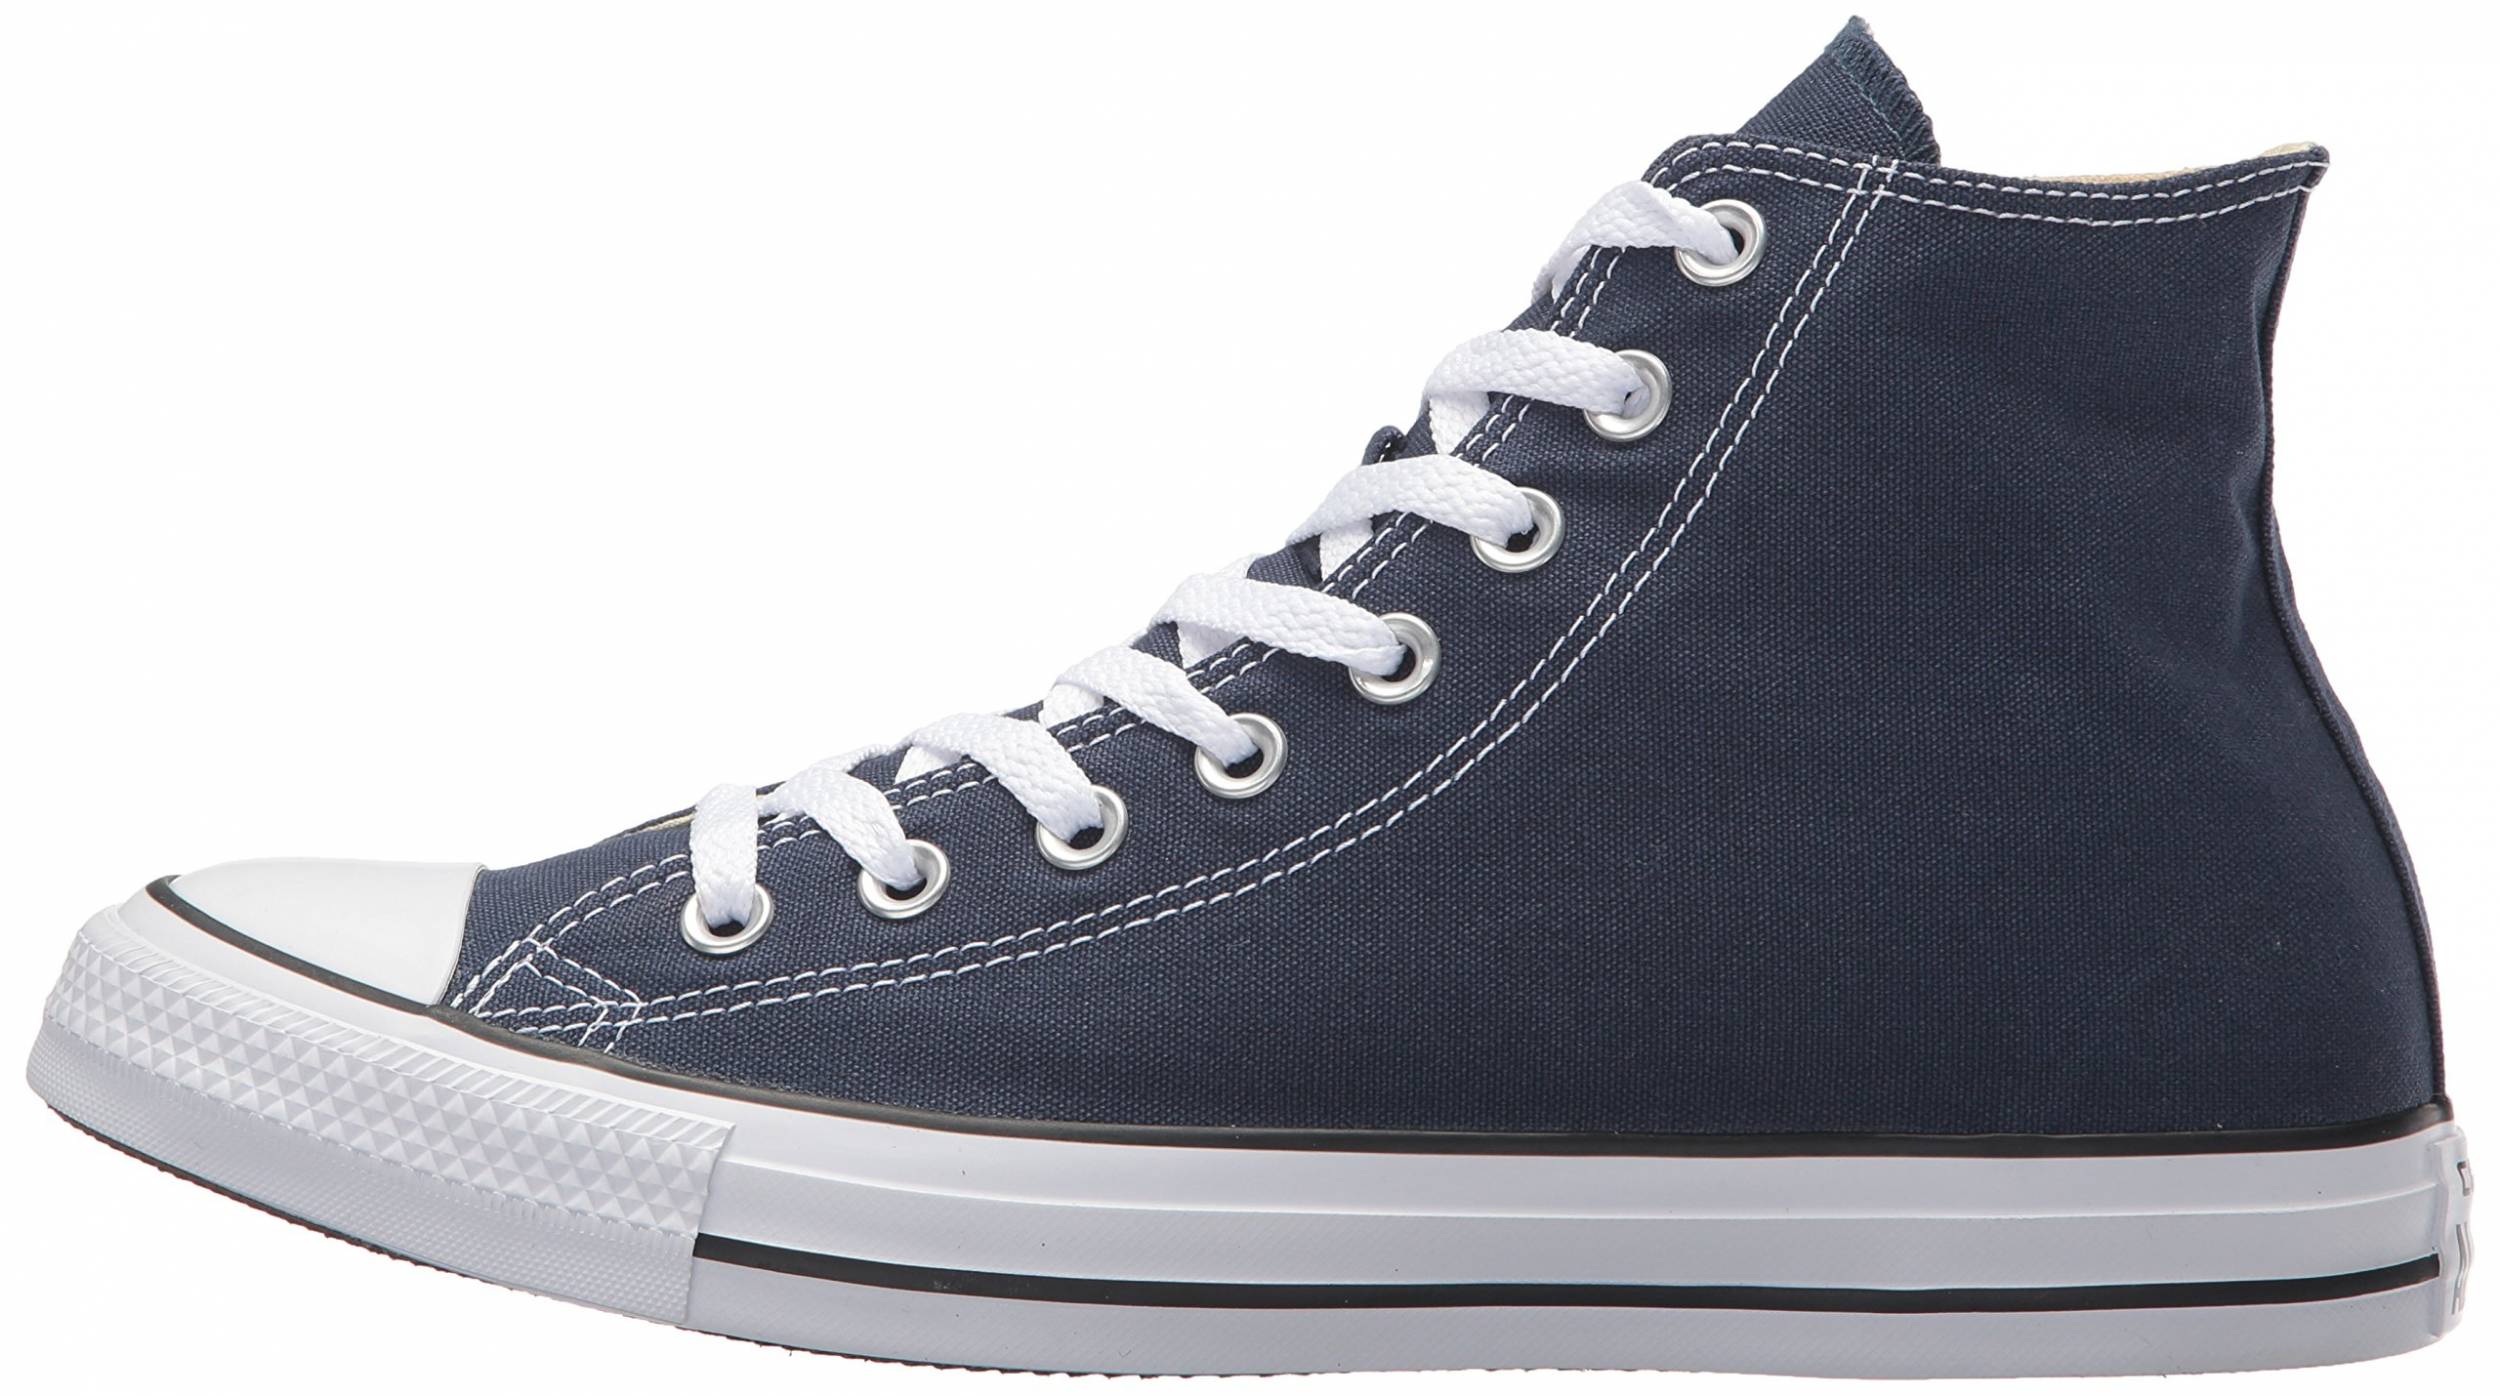 Save 11% on Blue High Top Sneakers (46 